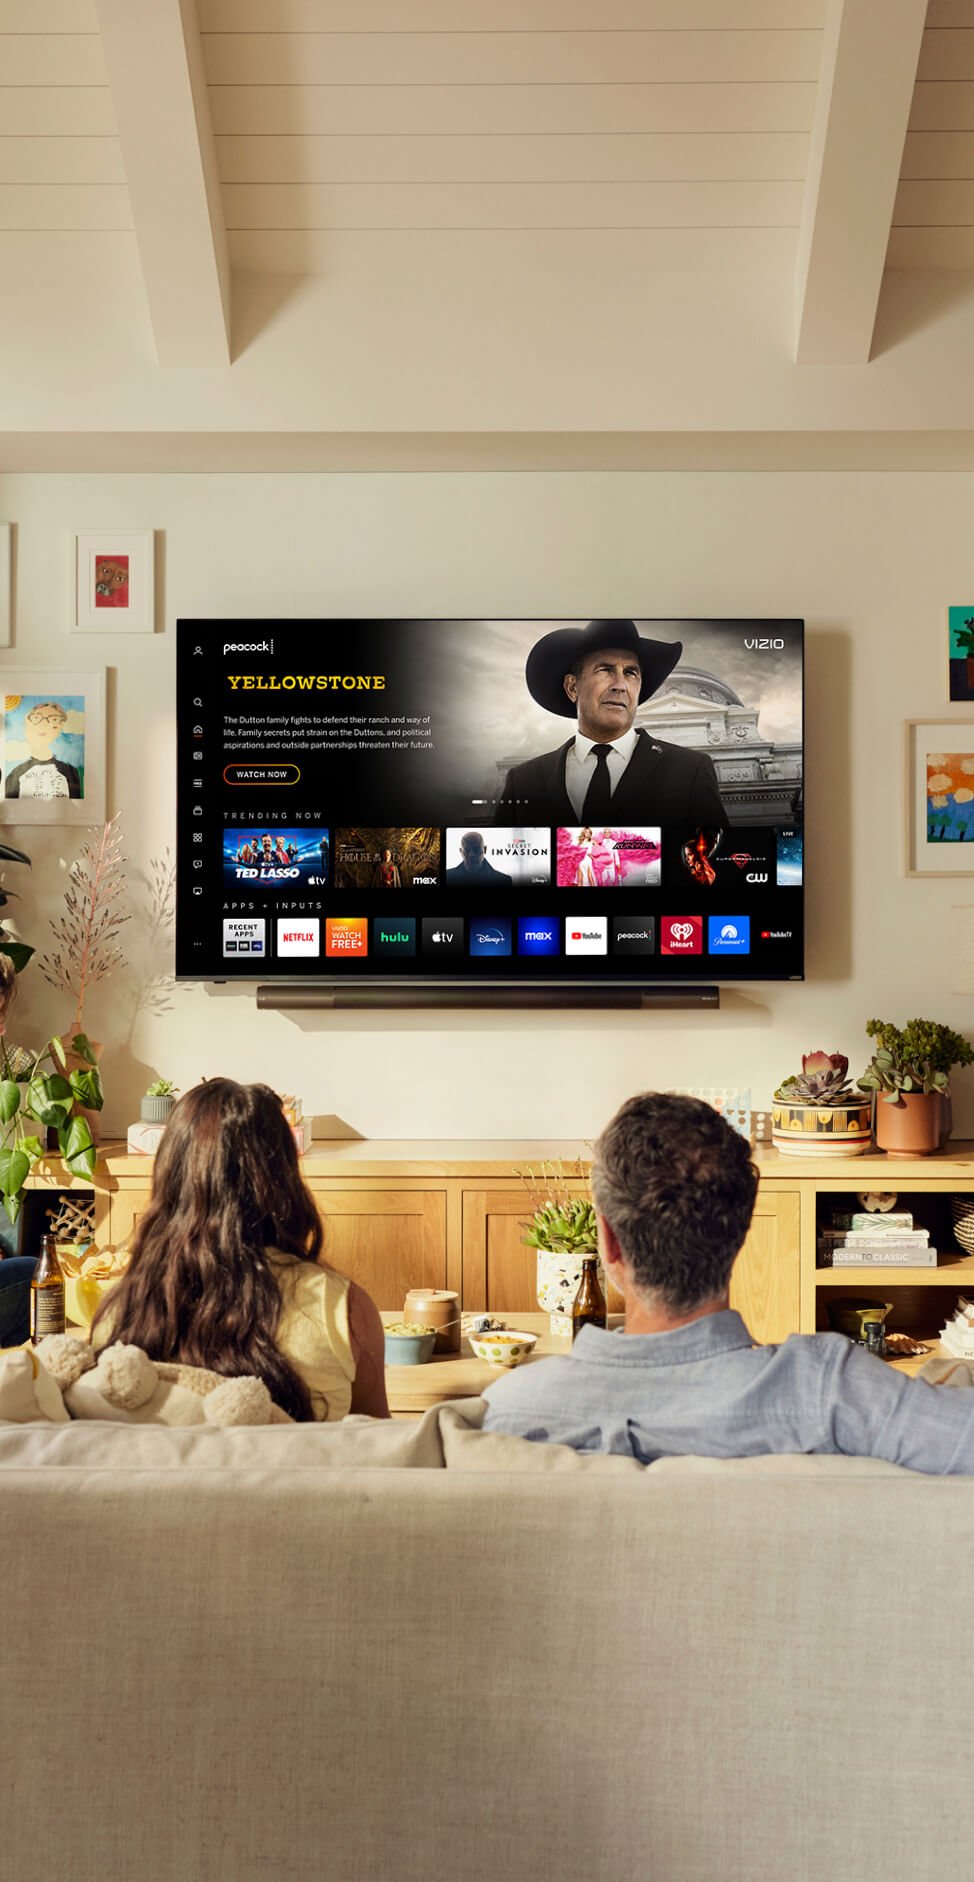 How to Add and Manage Apps on a Smart TV